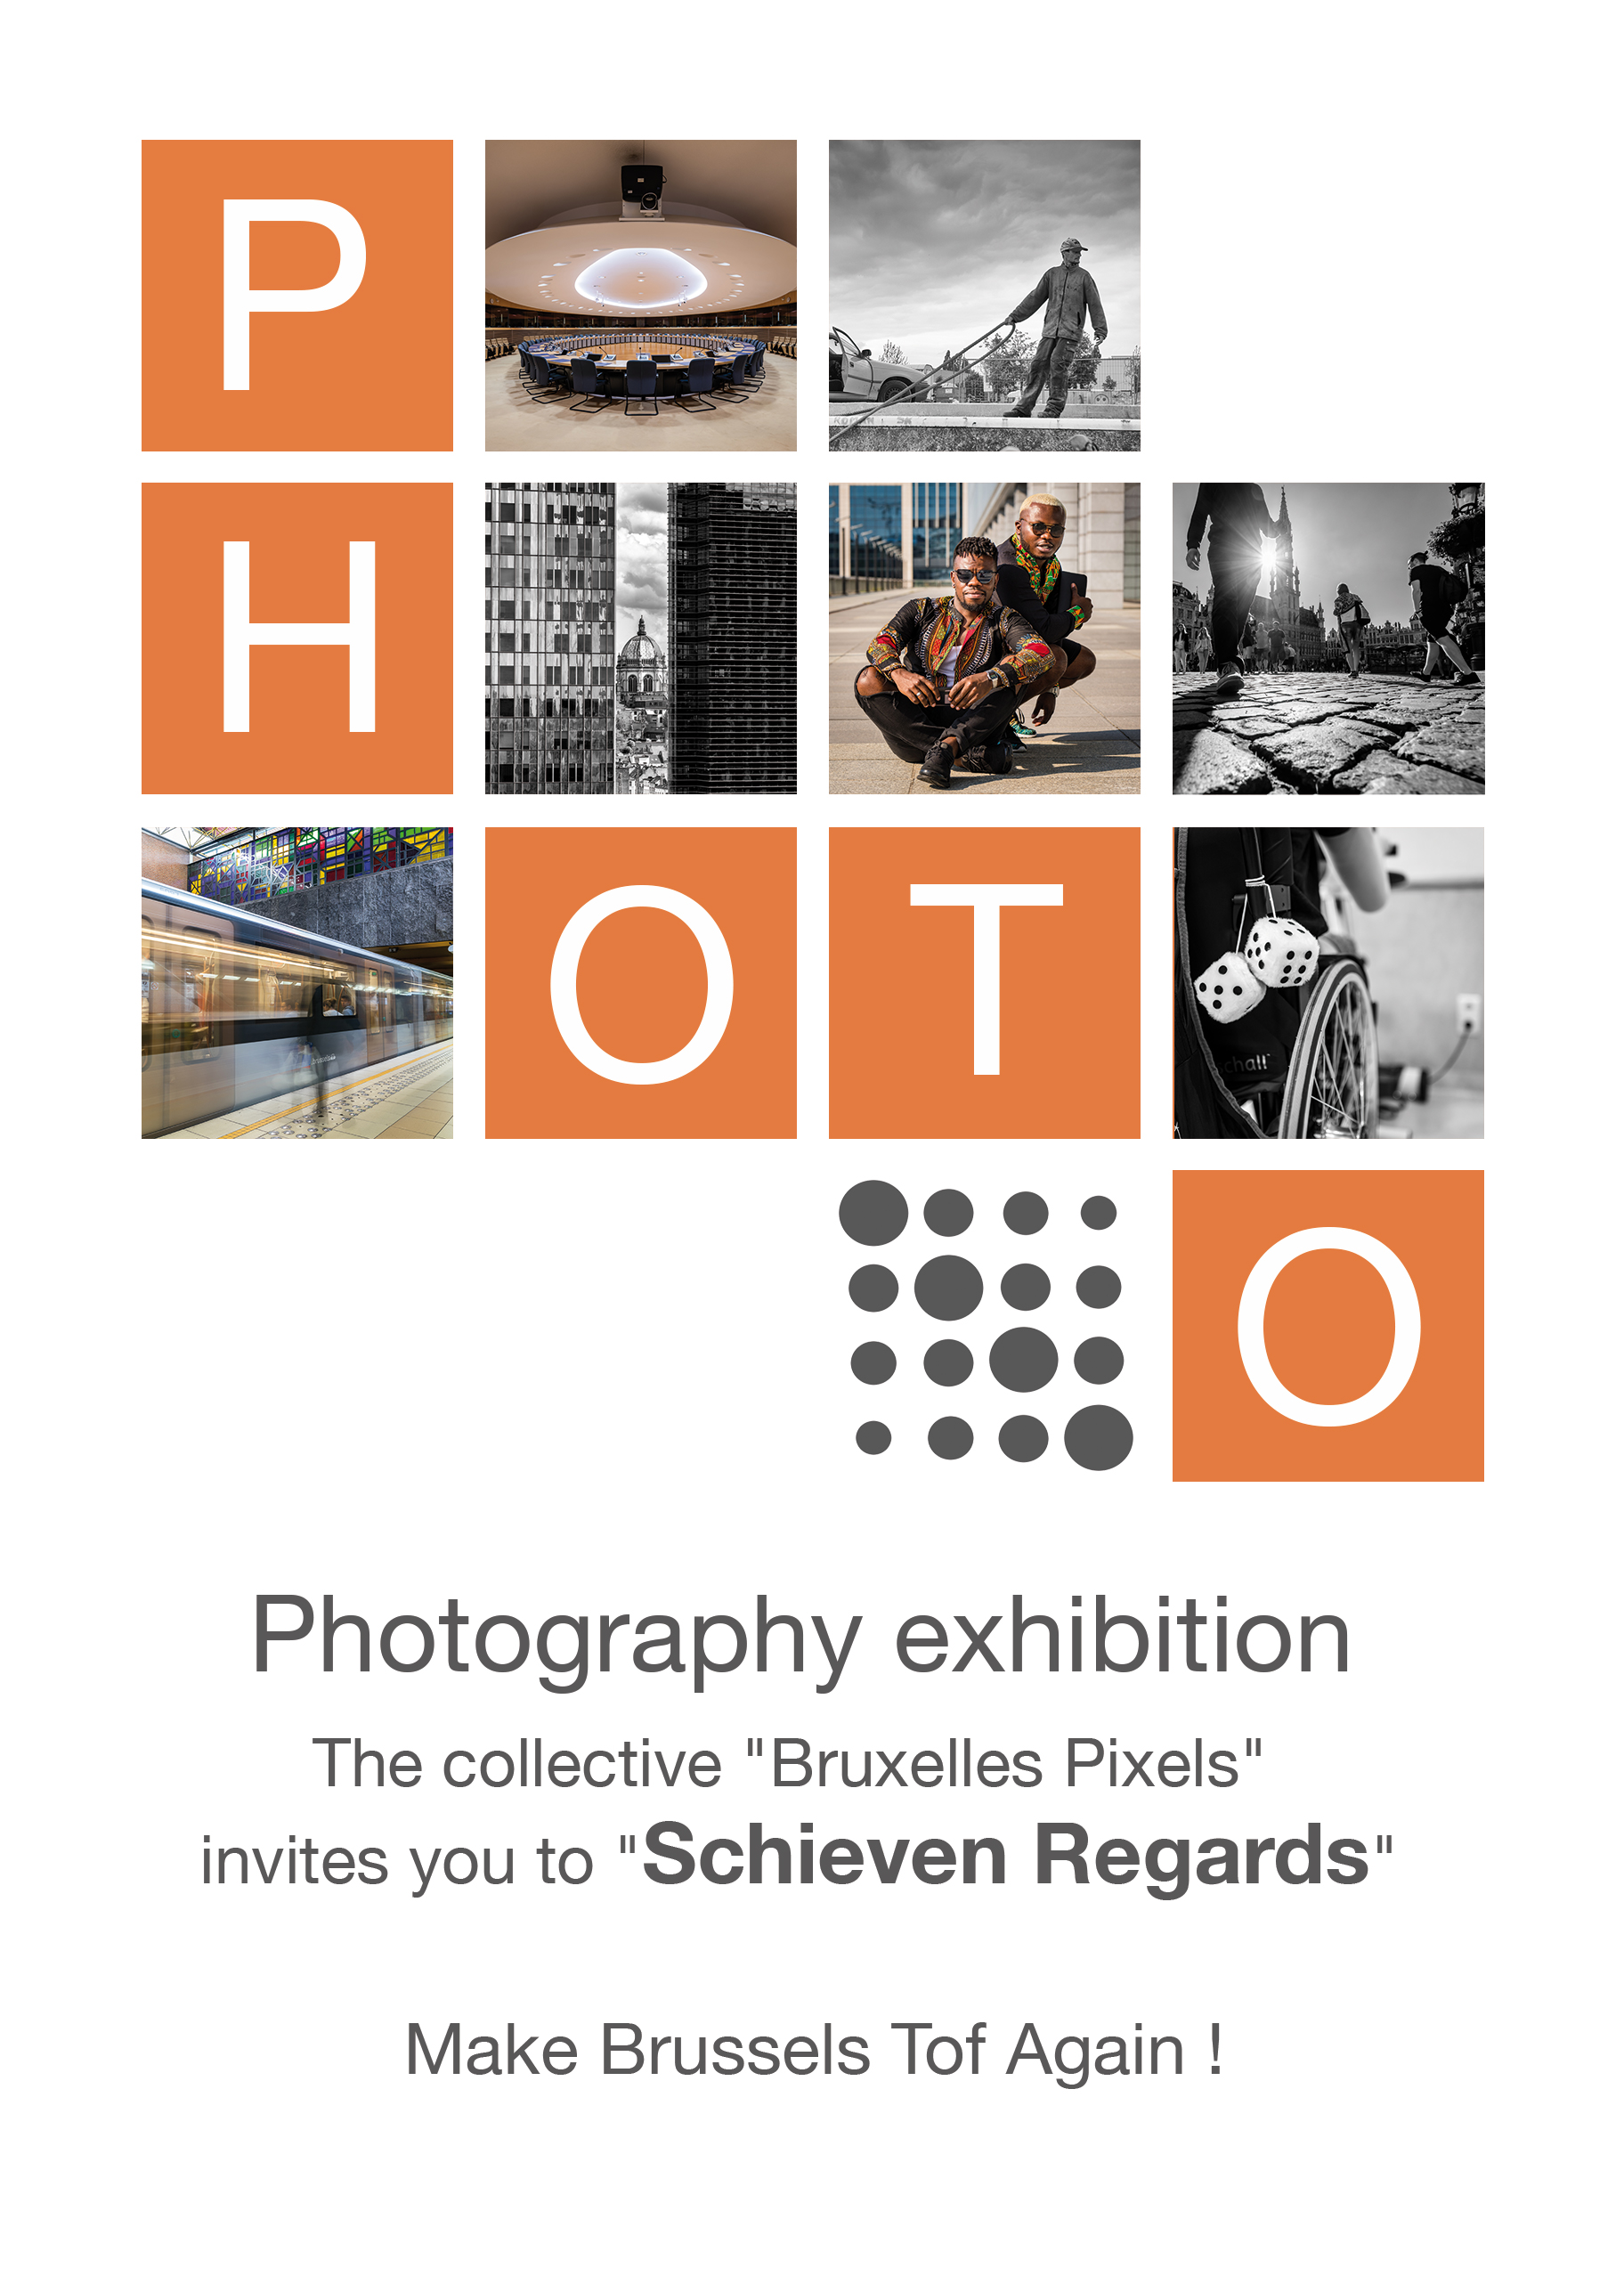 « Schieven Regards » a photography exhibition by Brussels Pixels, Oct 2018